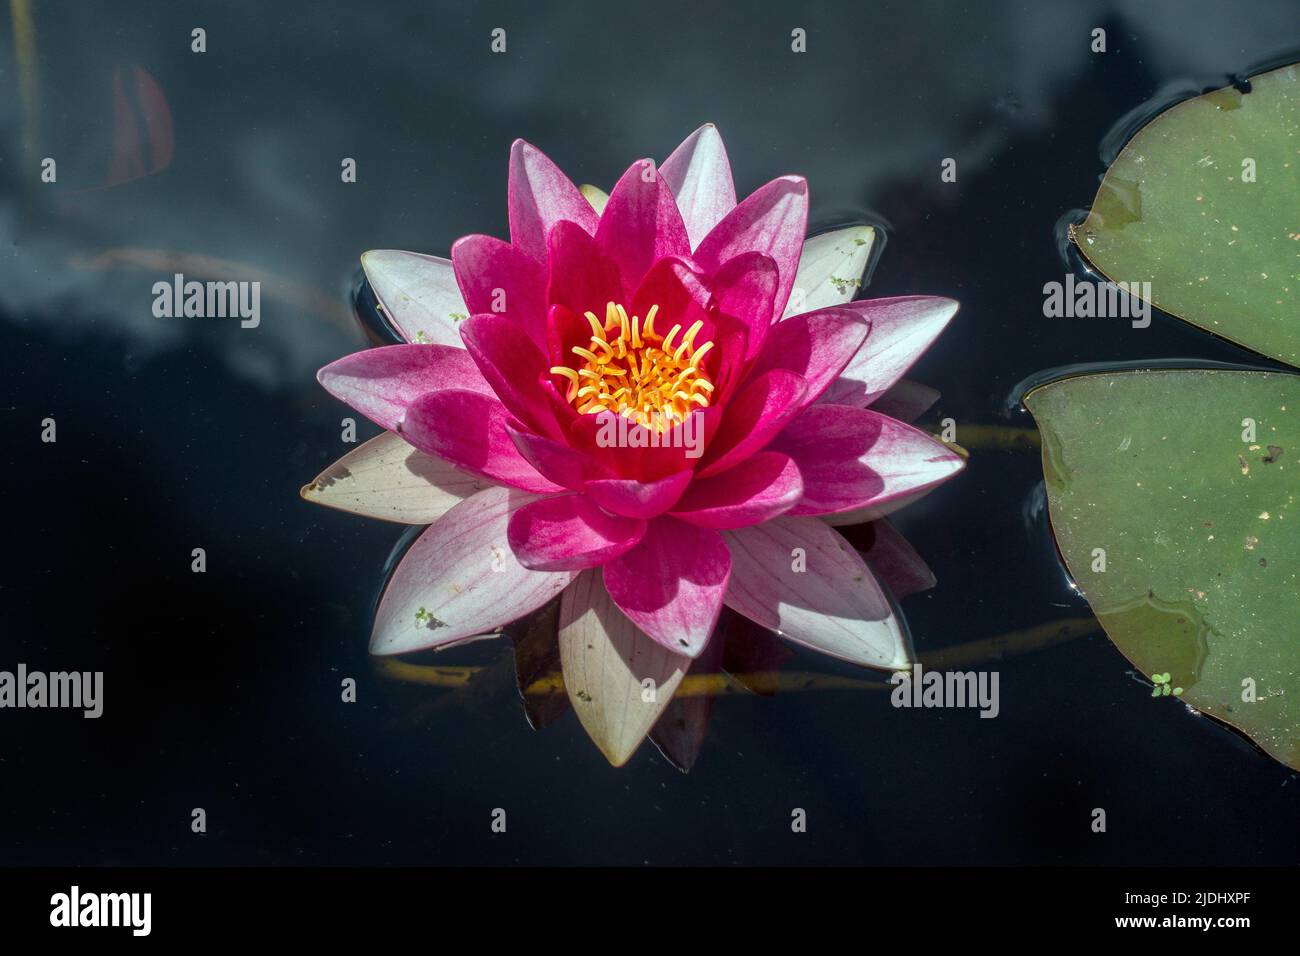 Nymphaea,Deep Pink,Purple,Water,Lilly,Pond Lily,Yellow Stamen, Stock Photo